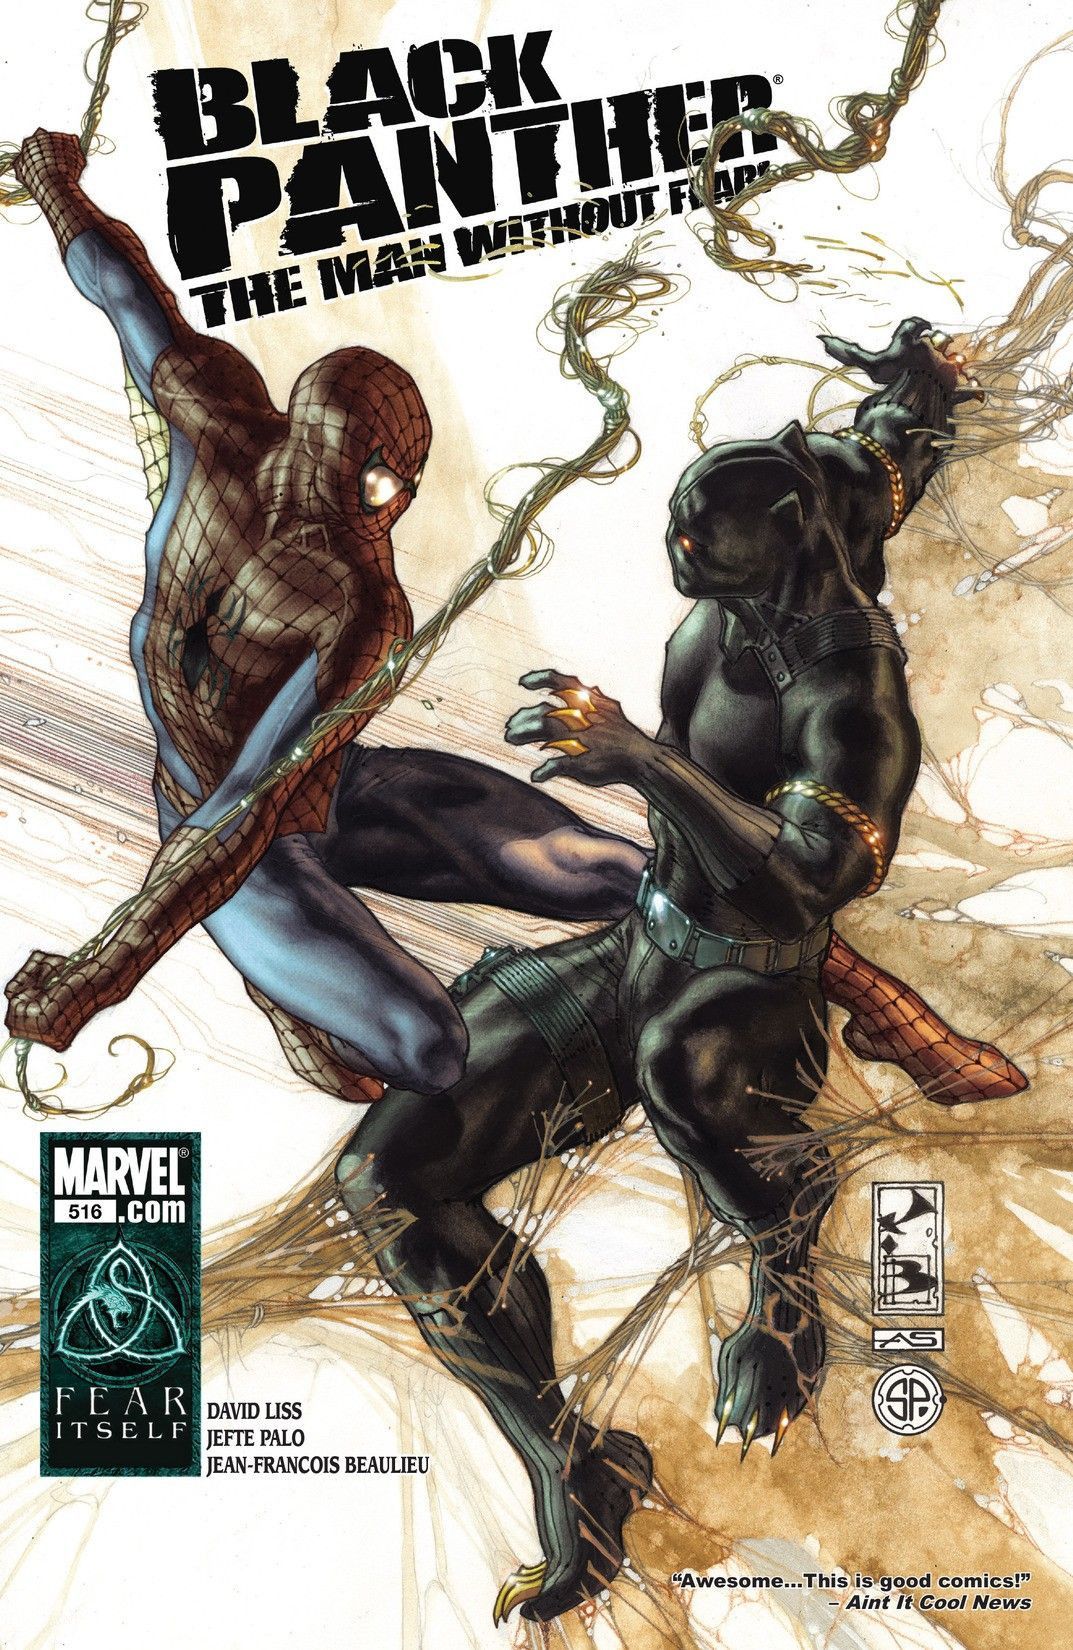 Black Panther: The Man Without Fear #516 Comic